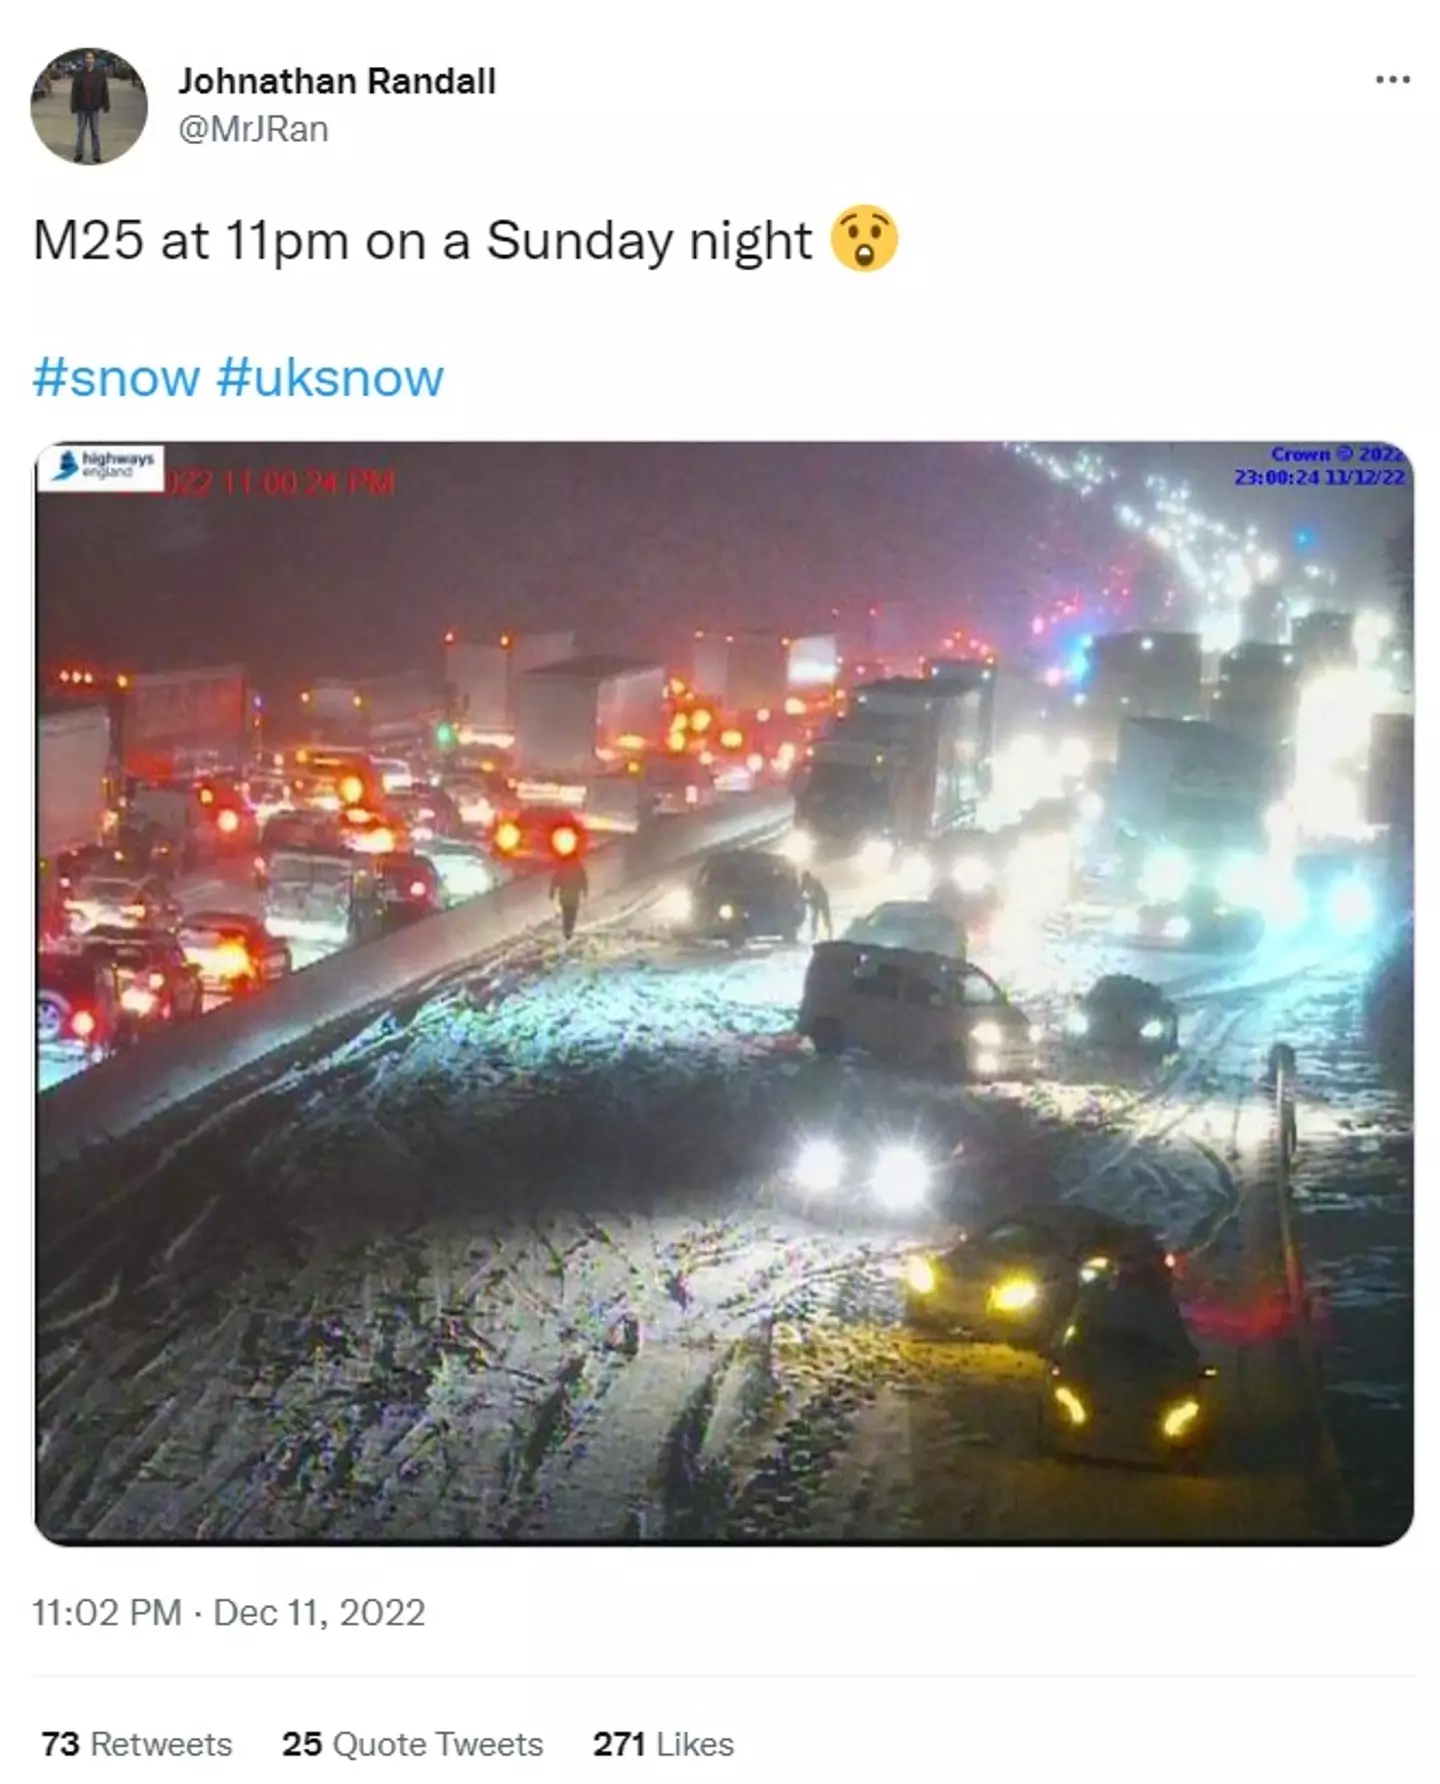 Motorists were stuck on the M25 with their vehicles trapped by the snowy conditions.